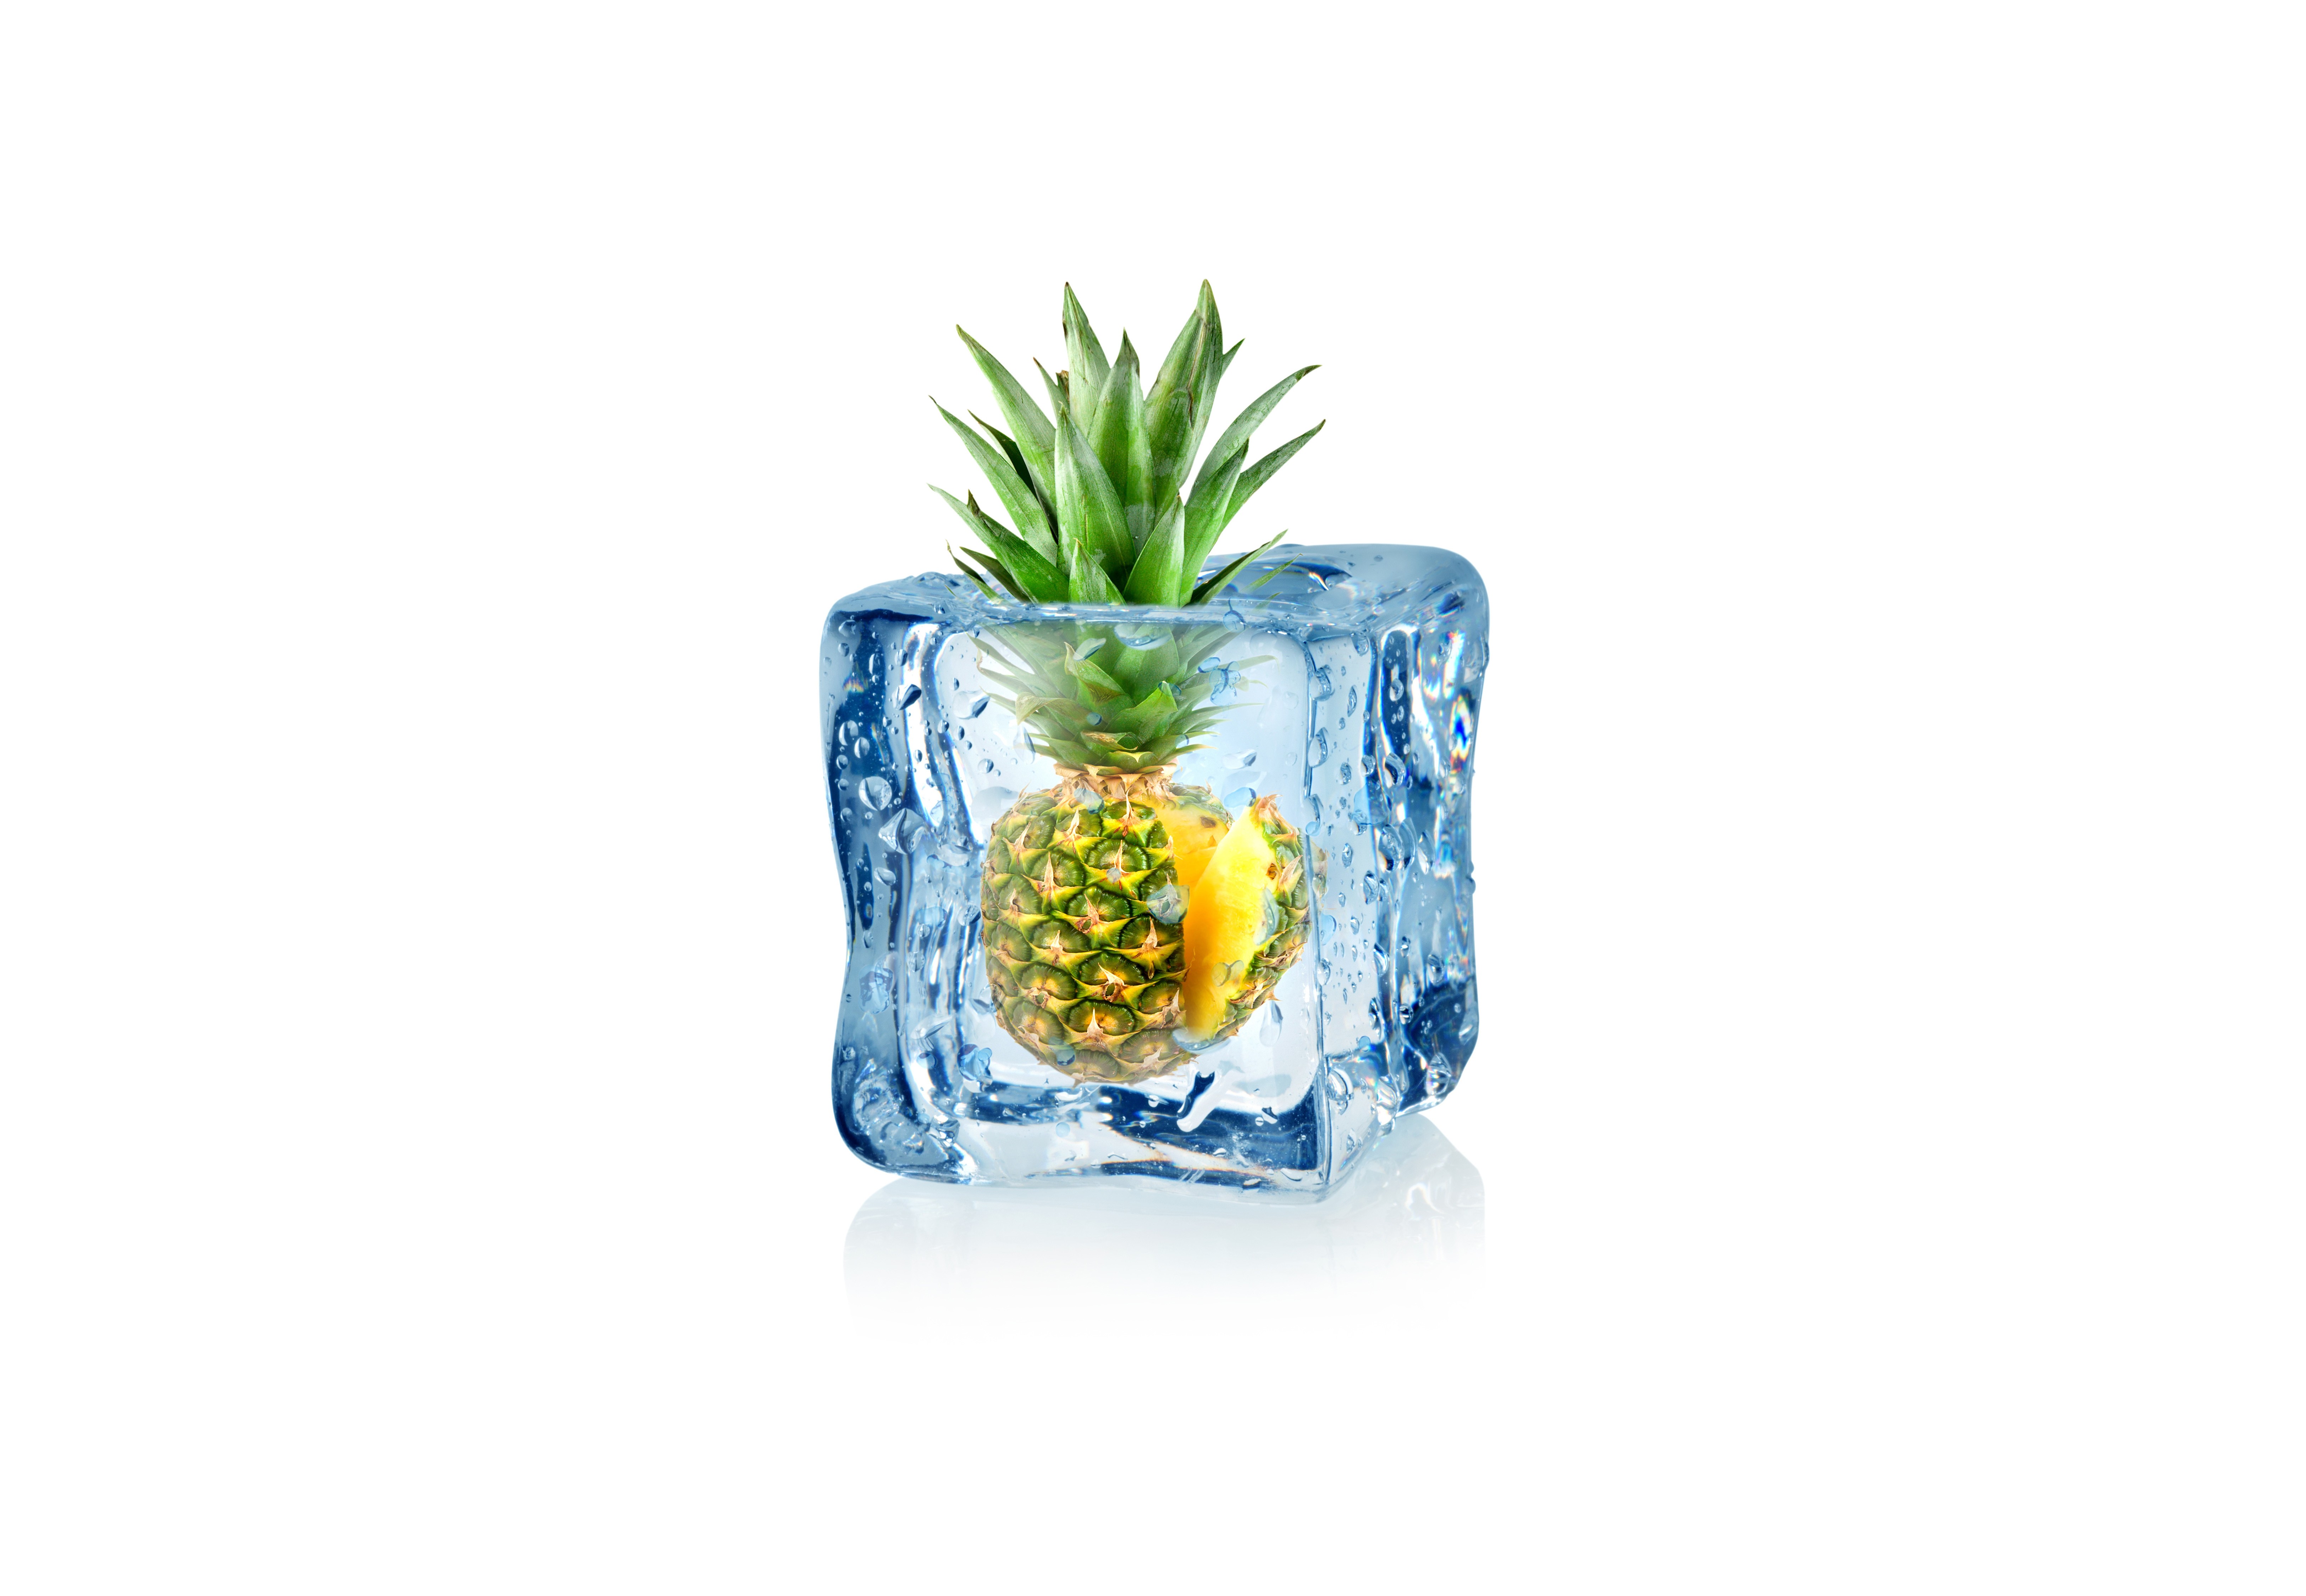 Minimalism White Background Fruit Digital Art Ice Cubes Pineapples Leaves Water Drops 6500x4500